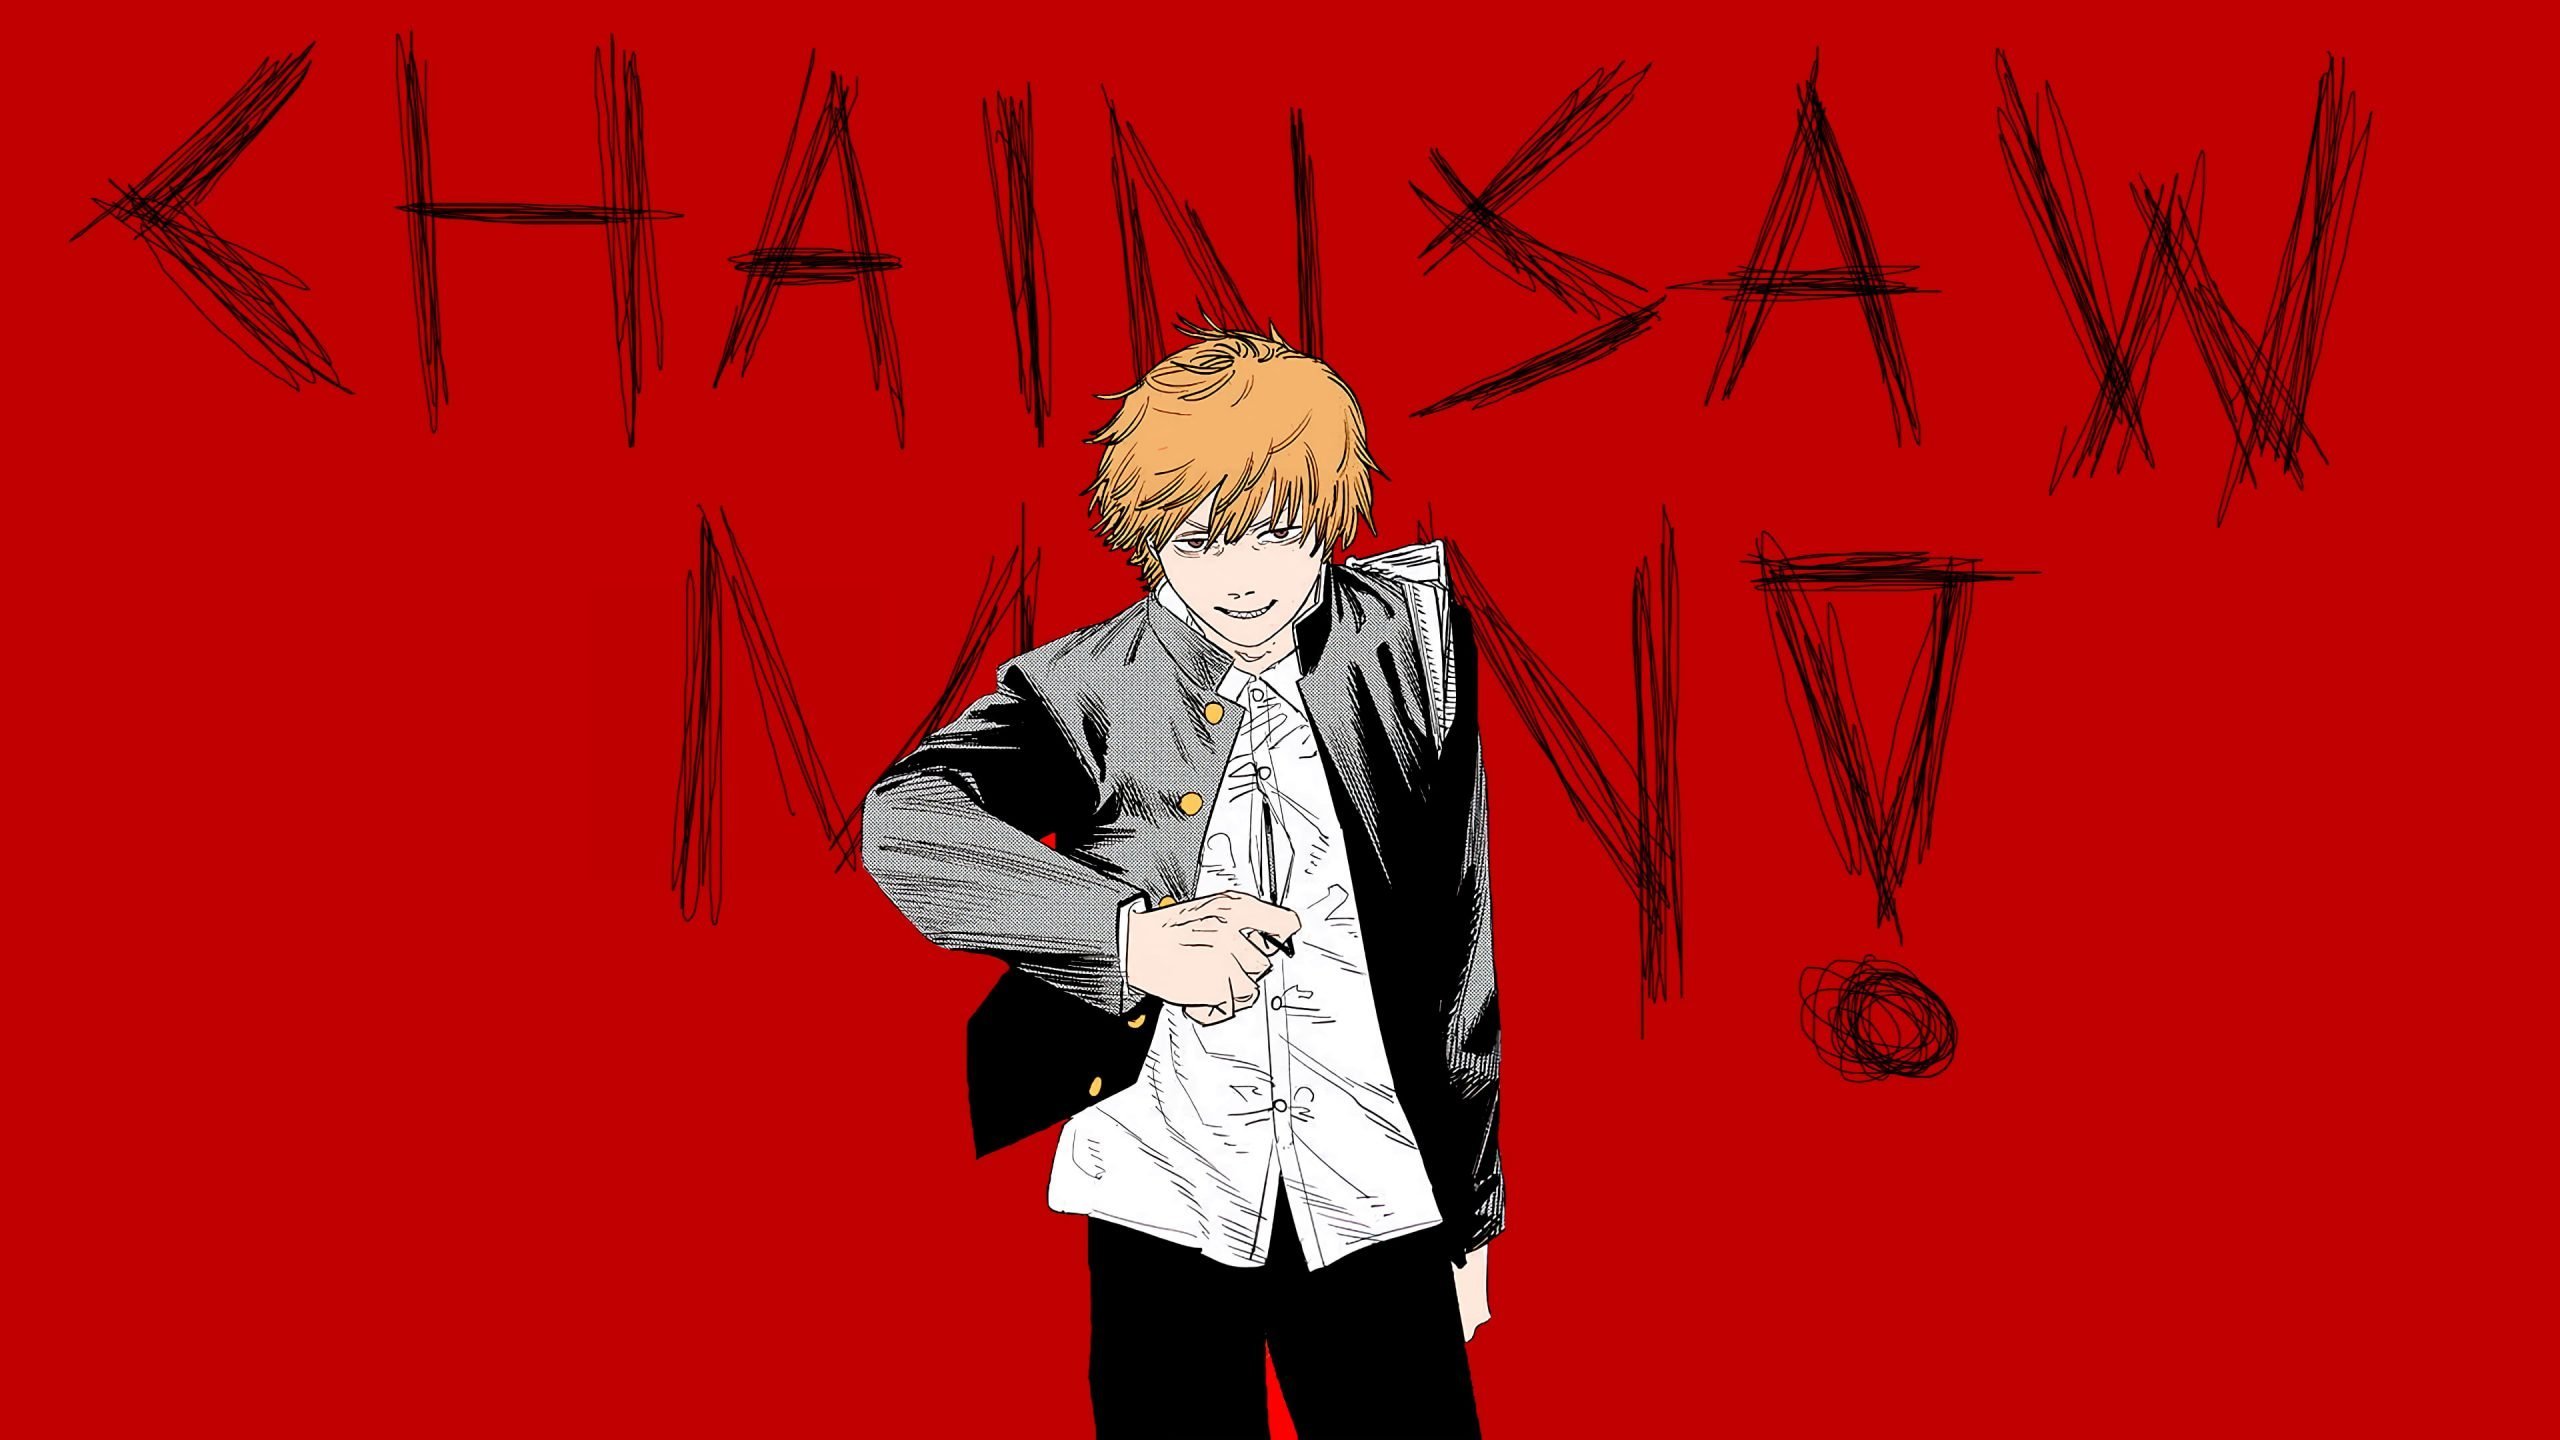 440+ Denji (Chainsaw Man) HD Wallpapers and Backgrounds